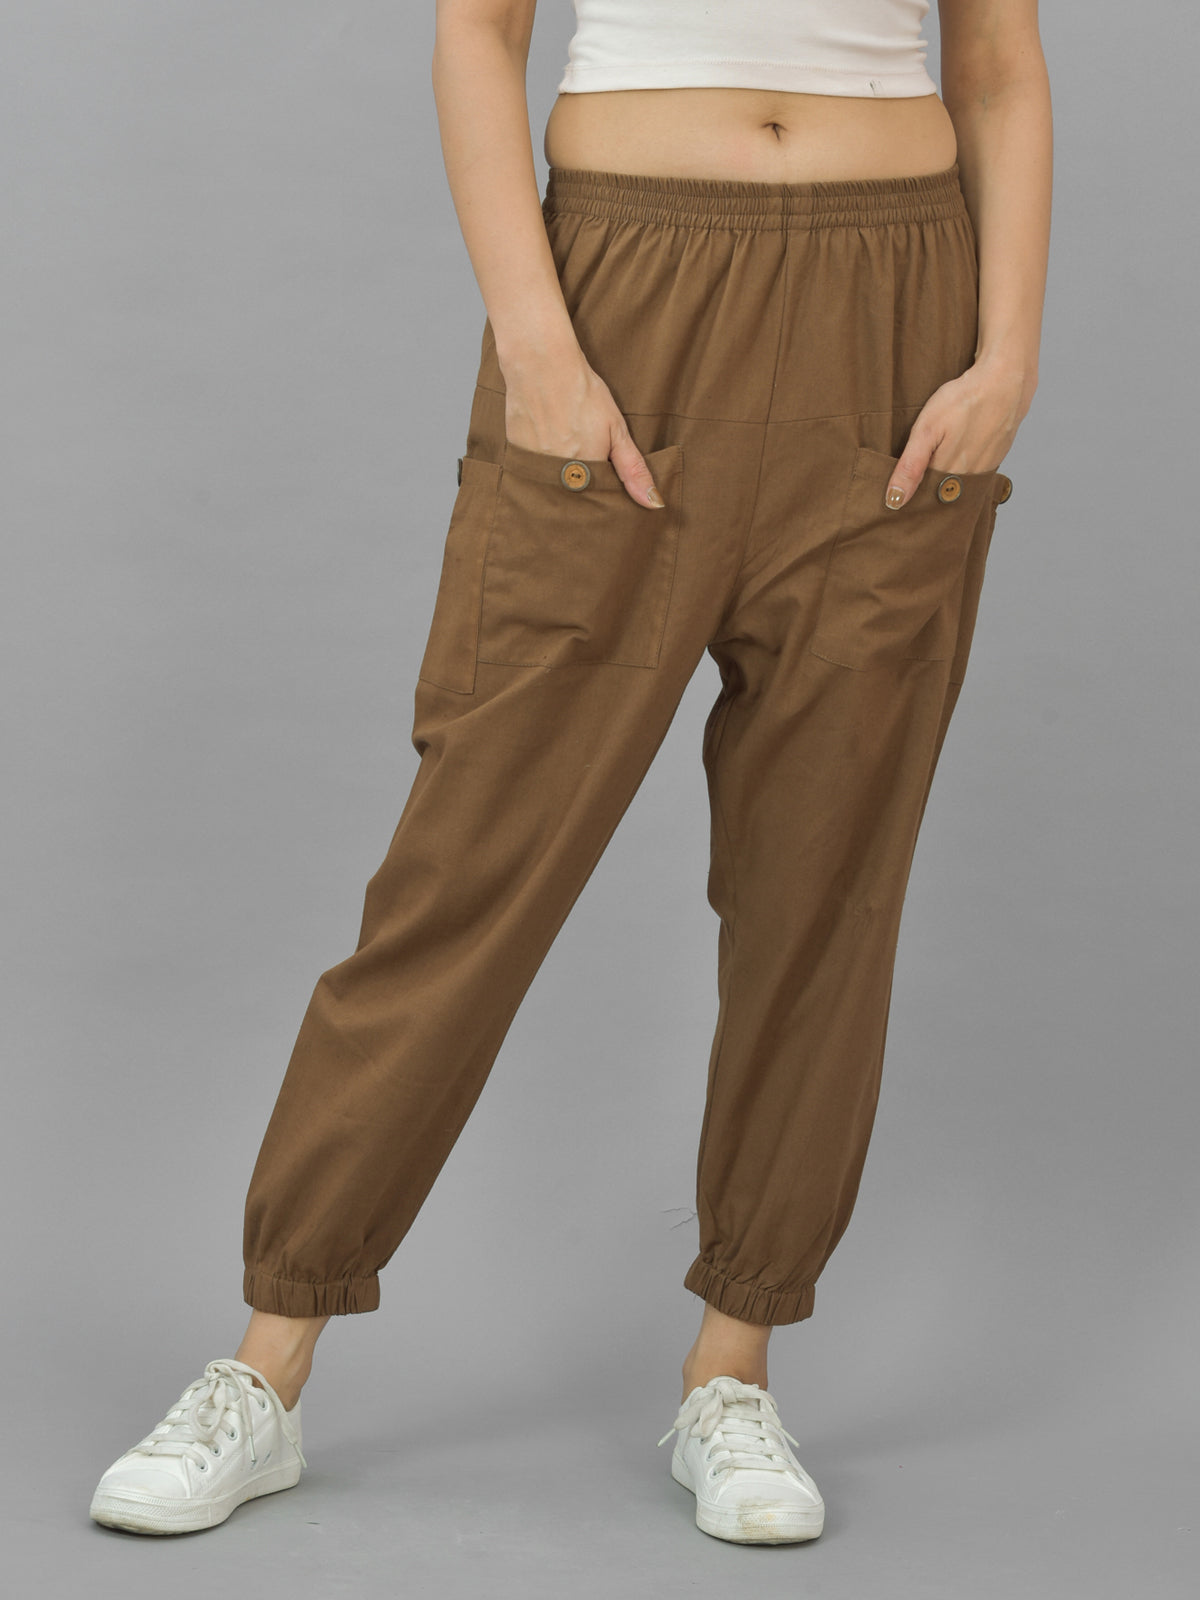 Combo Pack Of Womens Beige And Brown Four Pocket Cotton Cargo Pants